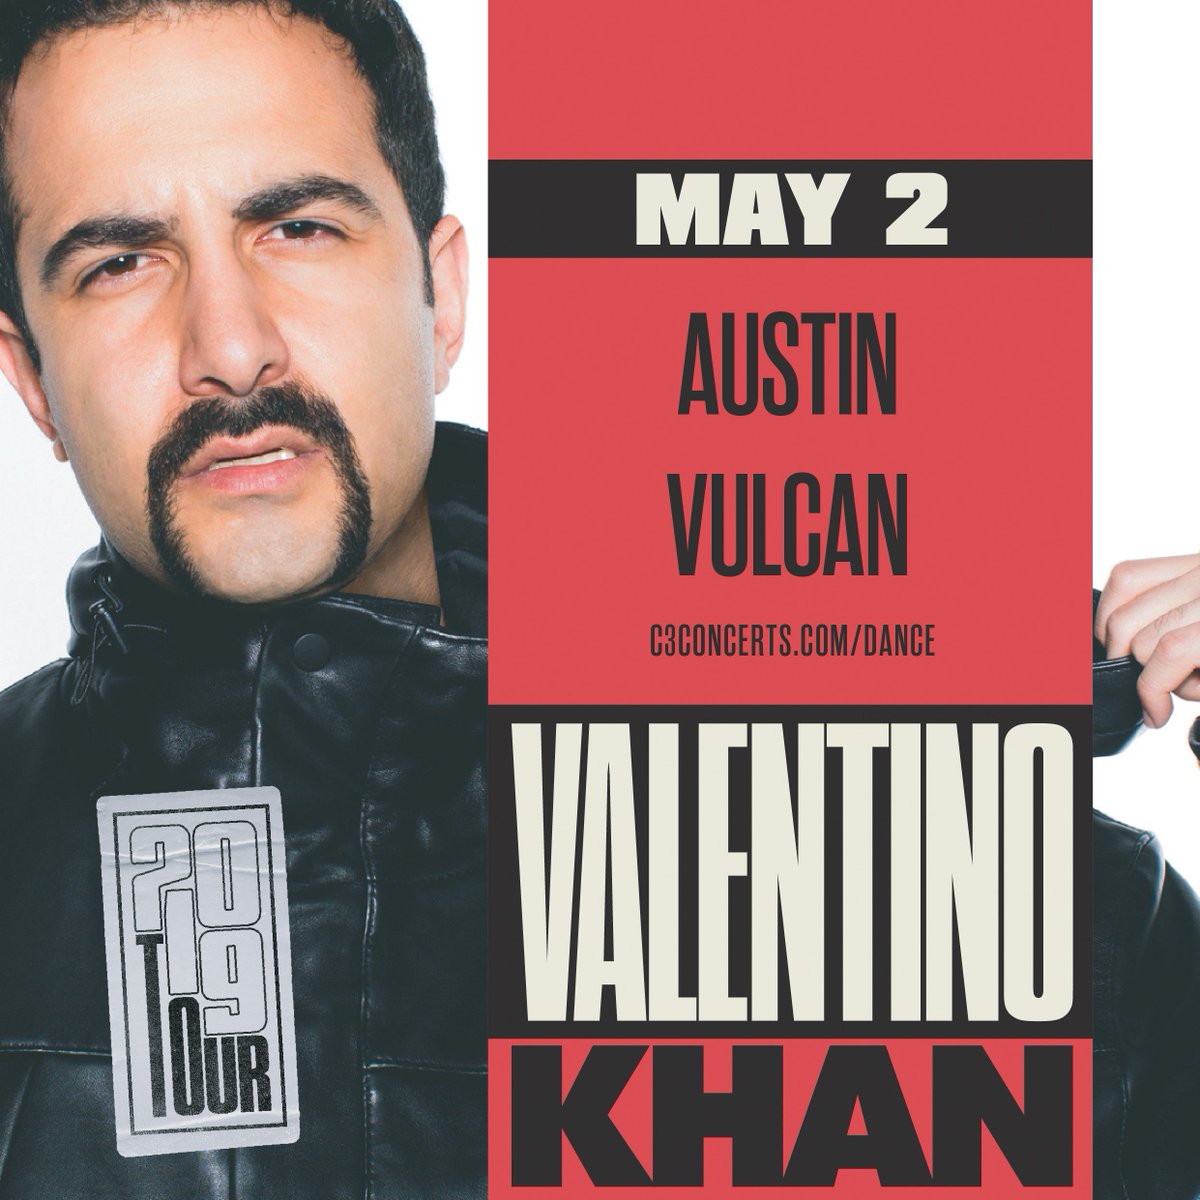 JUST ANNOUNCED! 🔥 🔥 🔥 @ValentinoKhan is coming to Vulcan May 2! More Info: bit.ly/ValentinoKhan_…